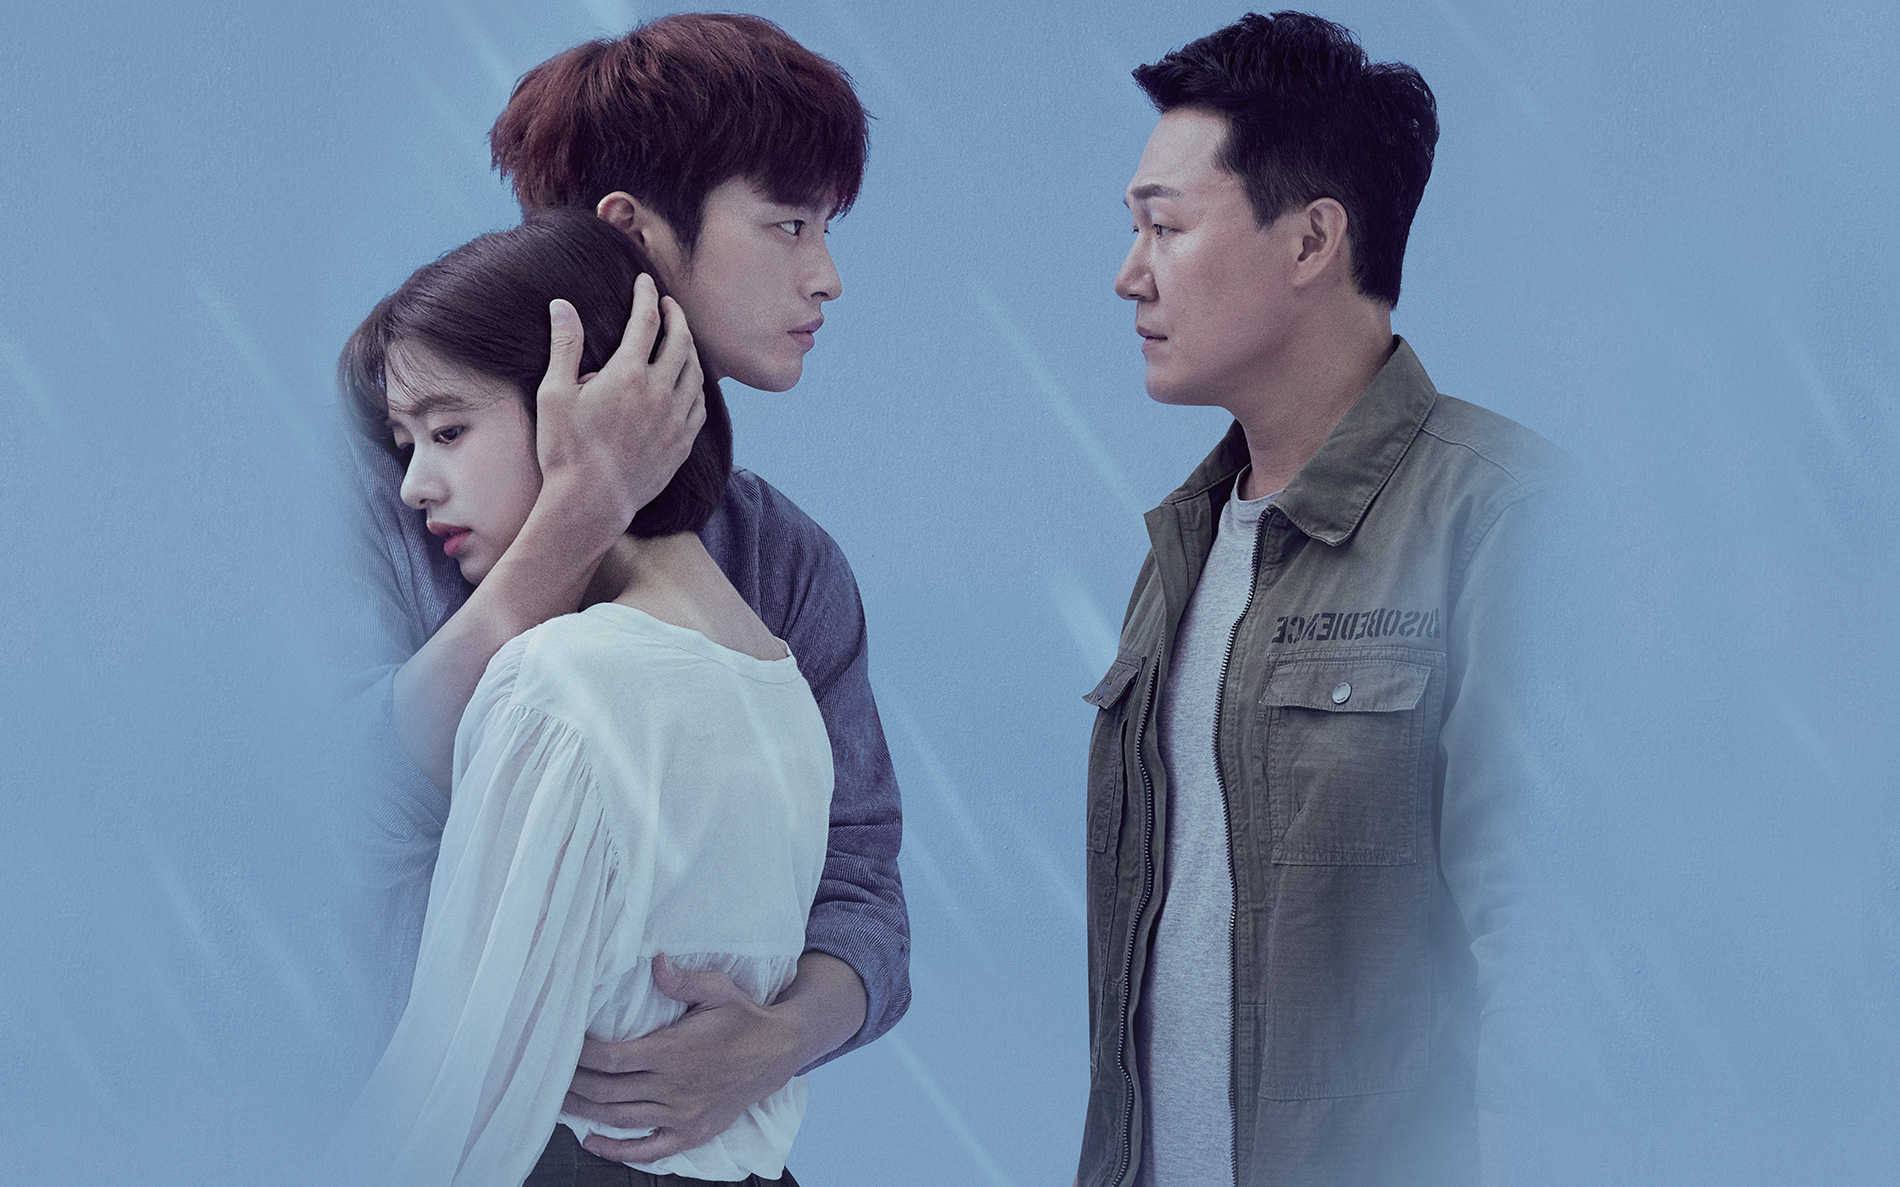 First Impressions - Encounter is a Refreshing Reverse of Every K-Drama Trop...